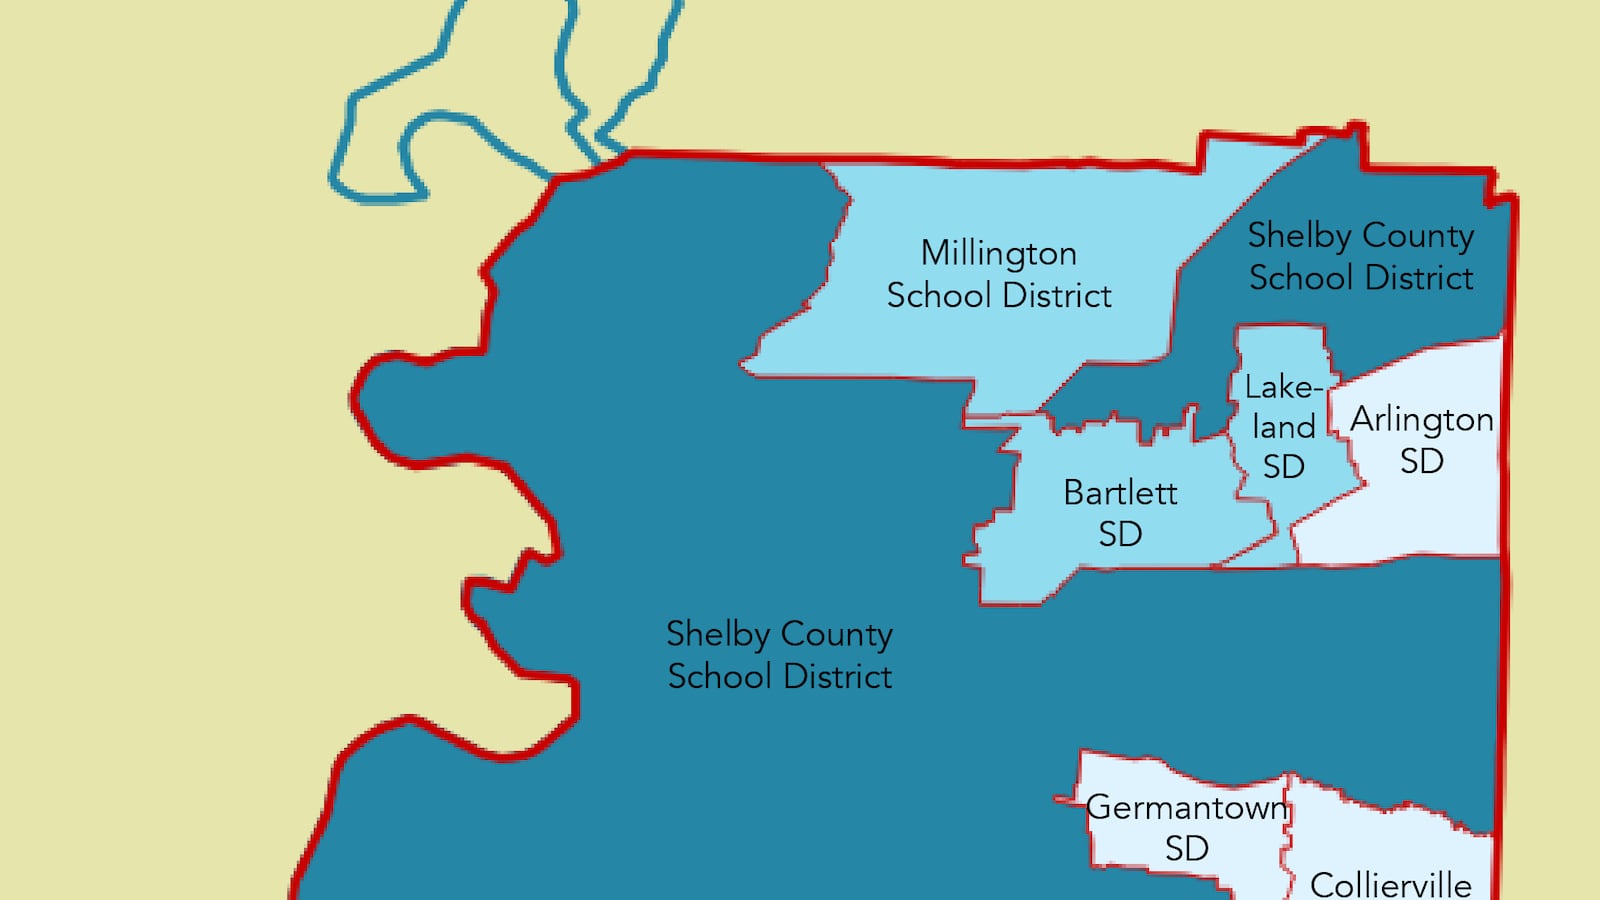 Six suburban towns pulled out of Shelby County Schools in 2014 to start their own districts in the wake of the 2013 consolidation of city and county schools.